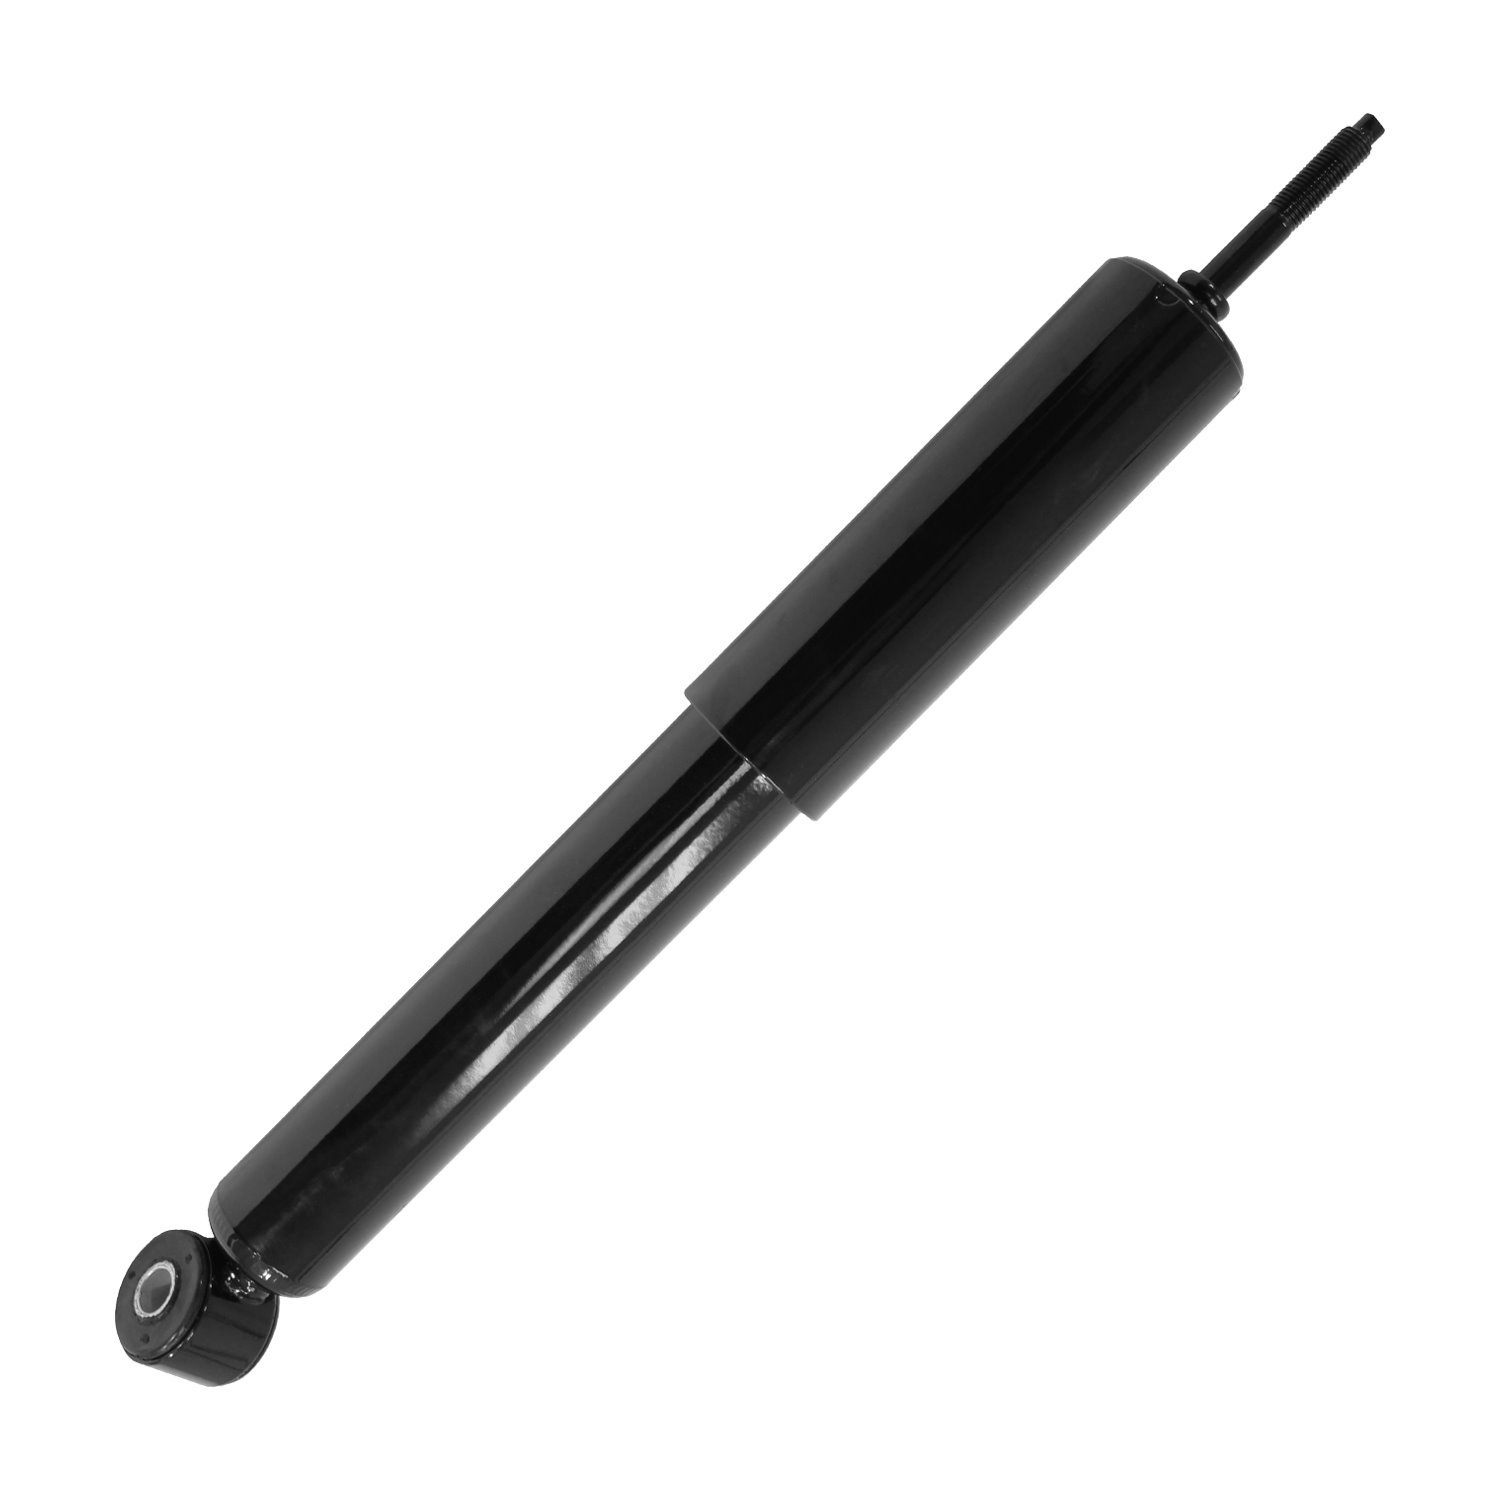 210030 Gas Charged Shock Absorber Fits Select Multiple Make/Models